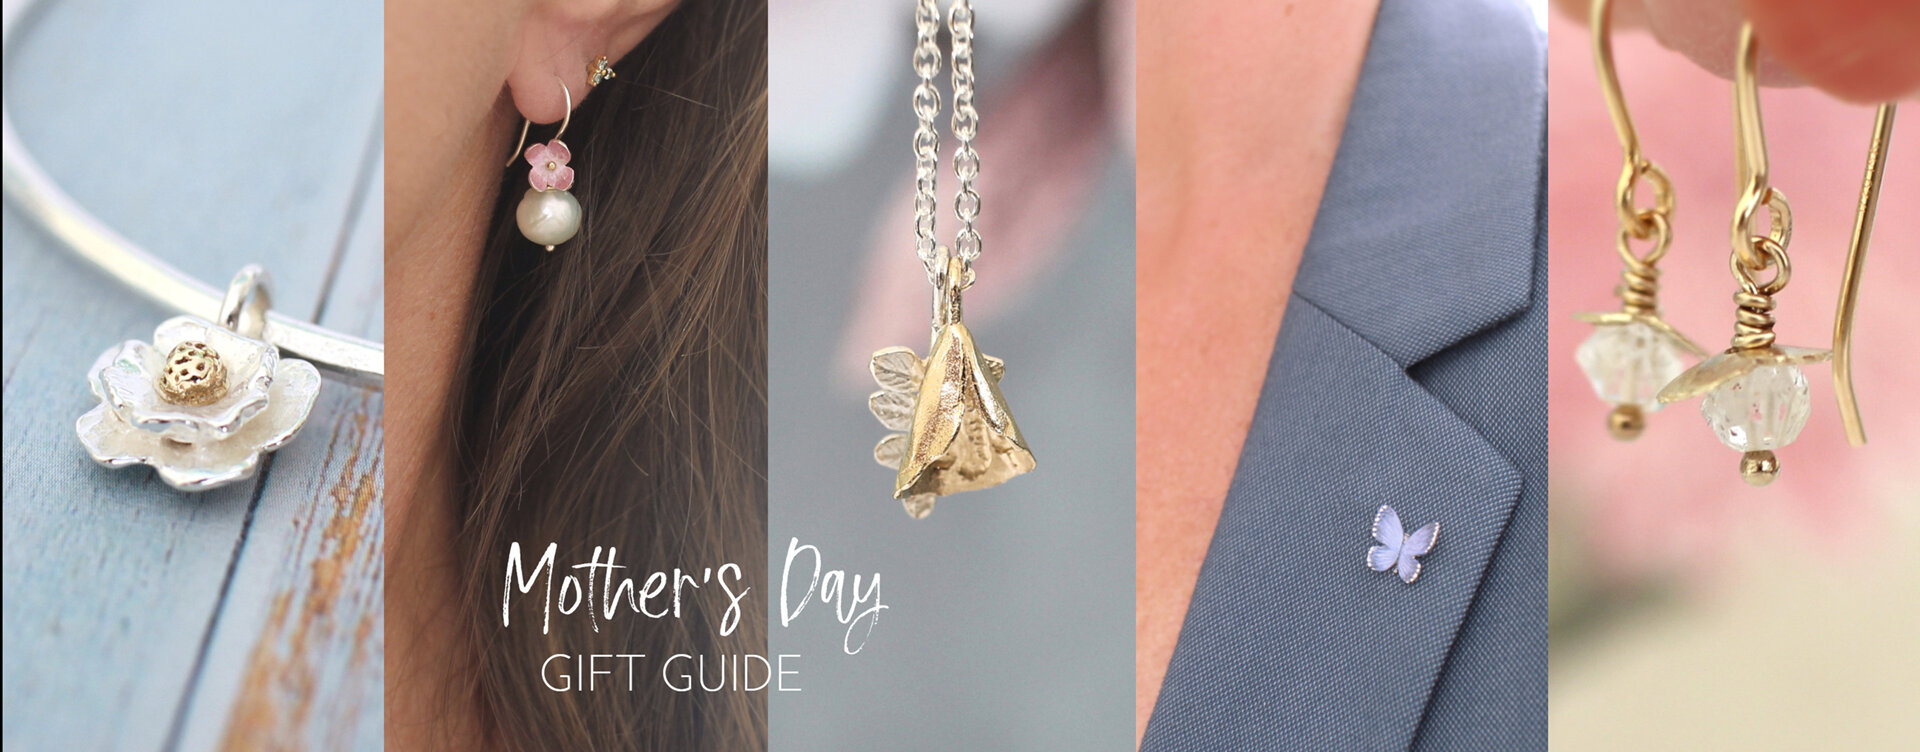 Mother's Day Gift Guide ideas new zealand handmade jewellery nz